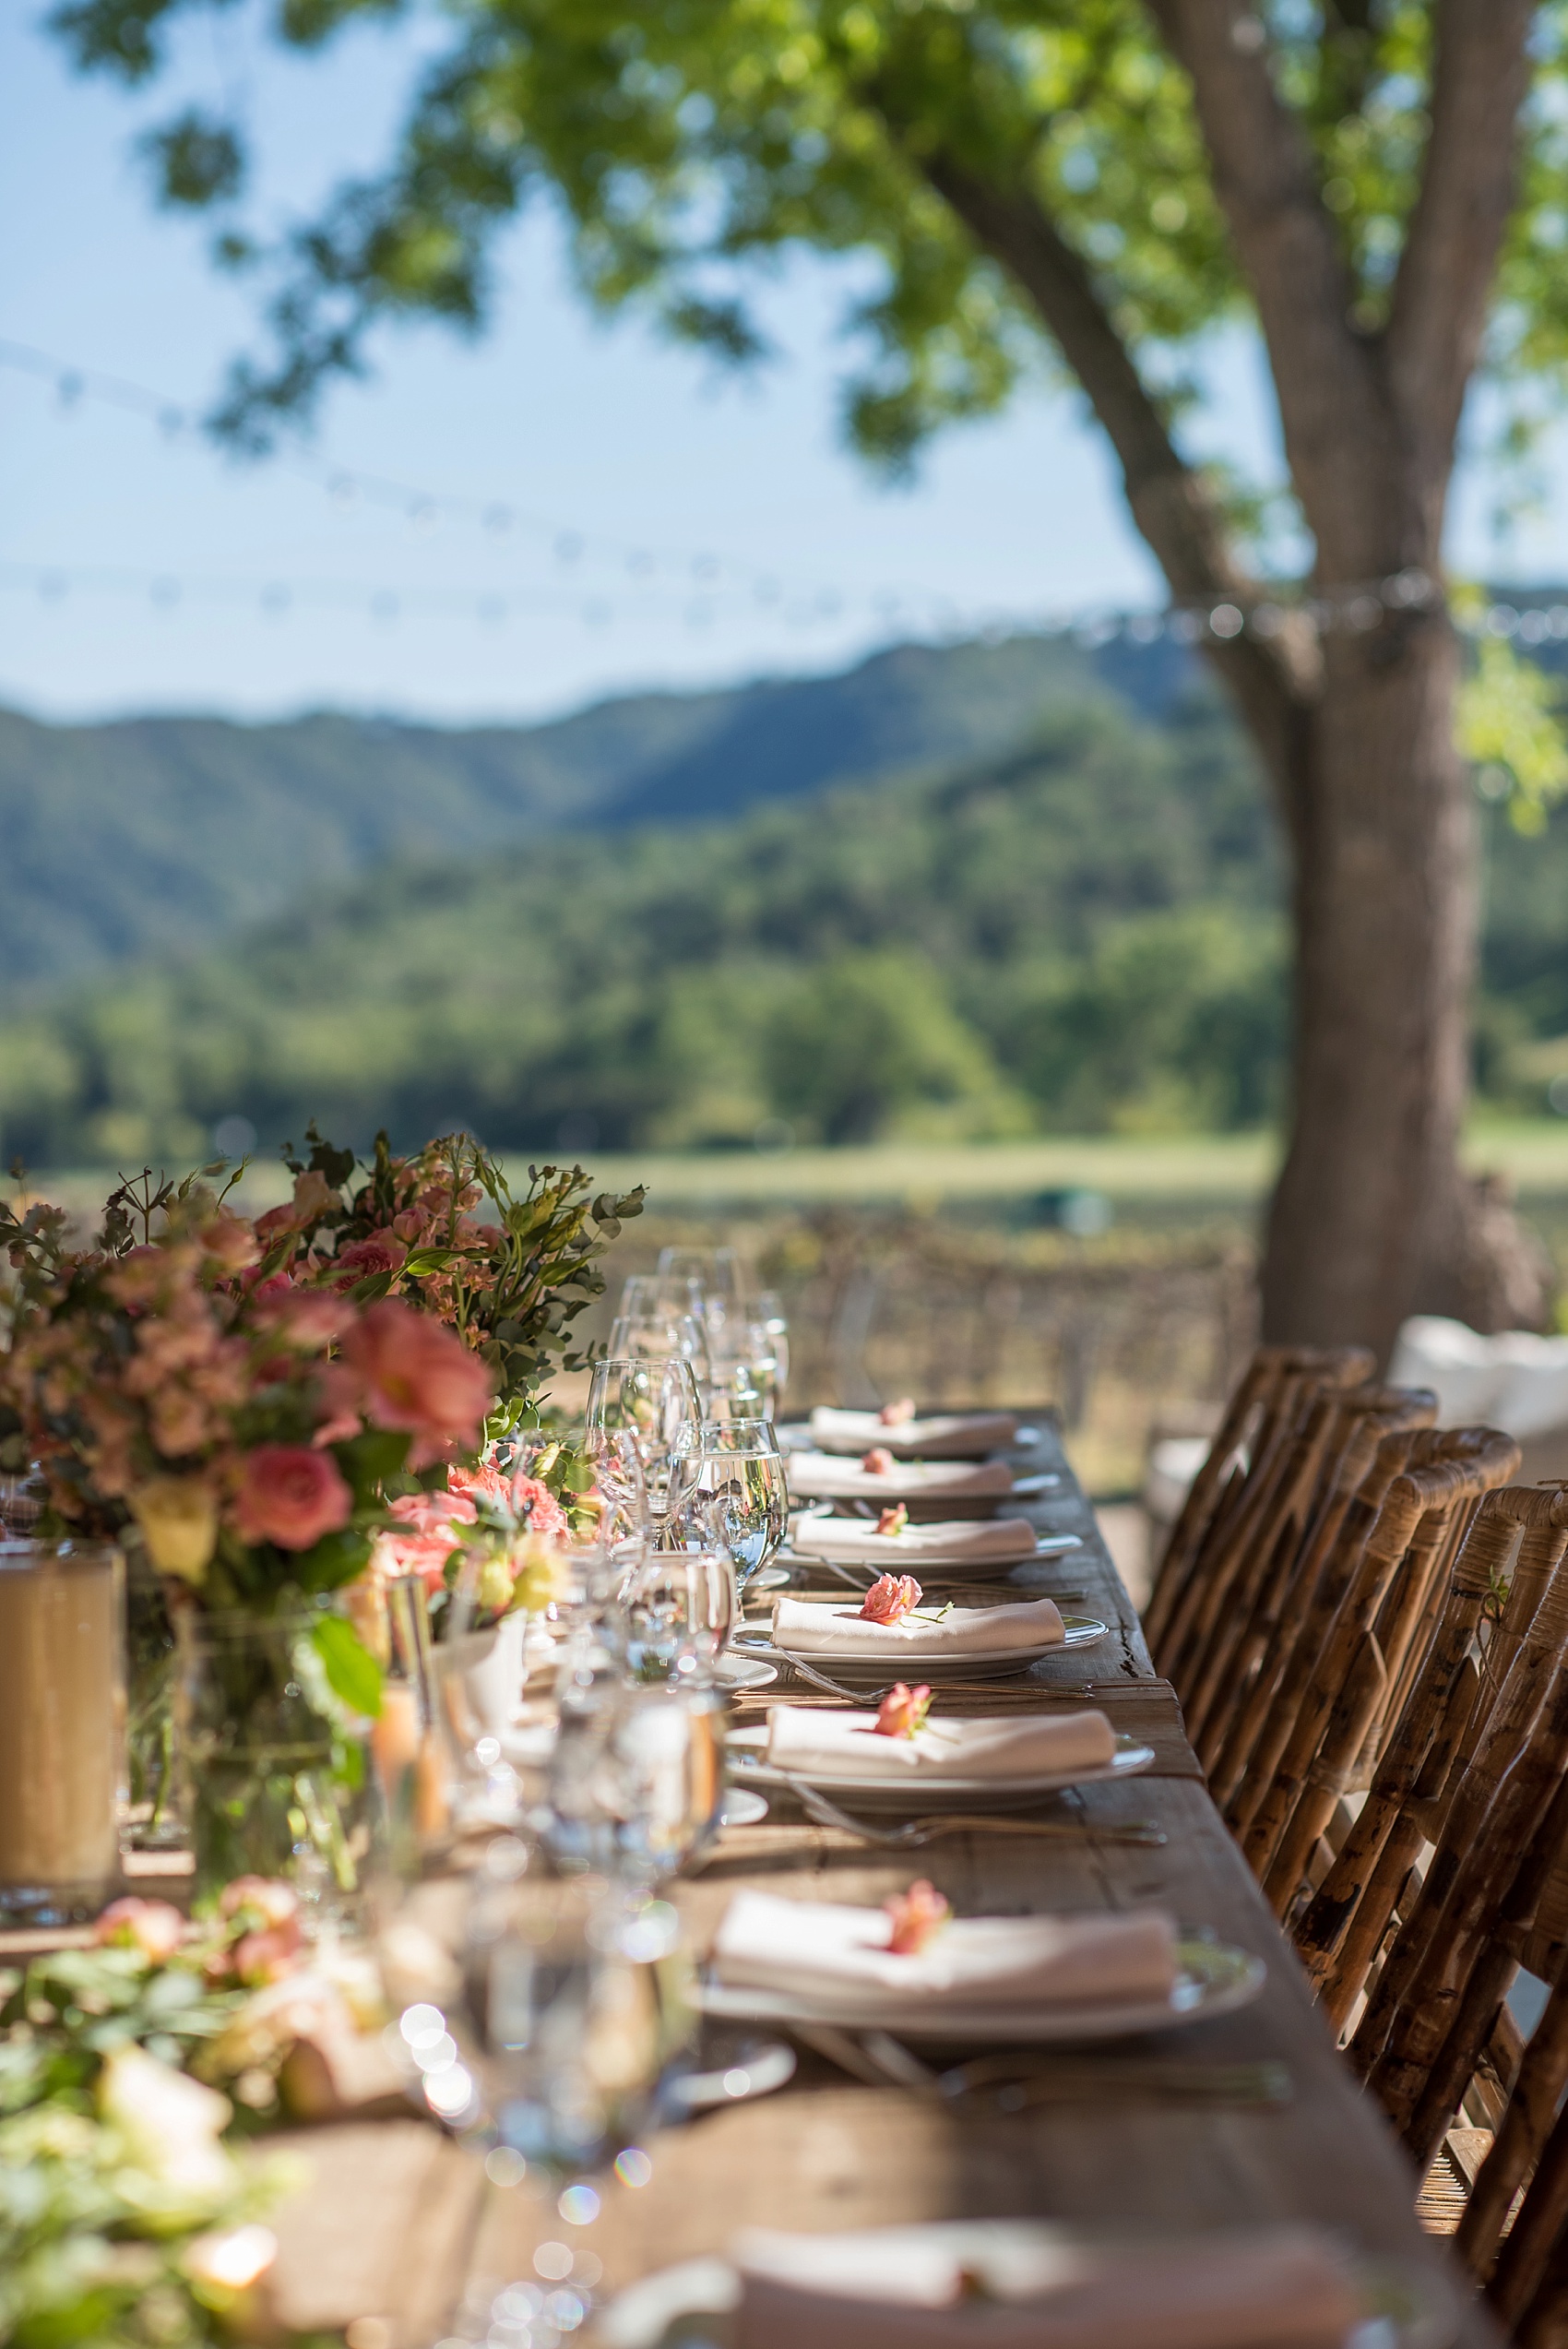 Spring vineyard elopement with pink flowers and barn reception. Photos by Mikkel Paige, destination wedding photographer. Held at HammerSky Vineyard, south of San Francisco. 